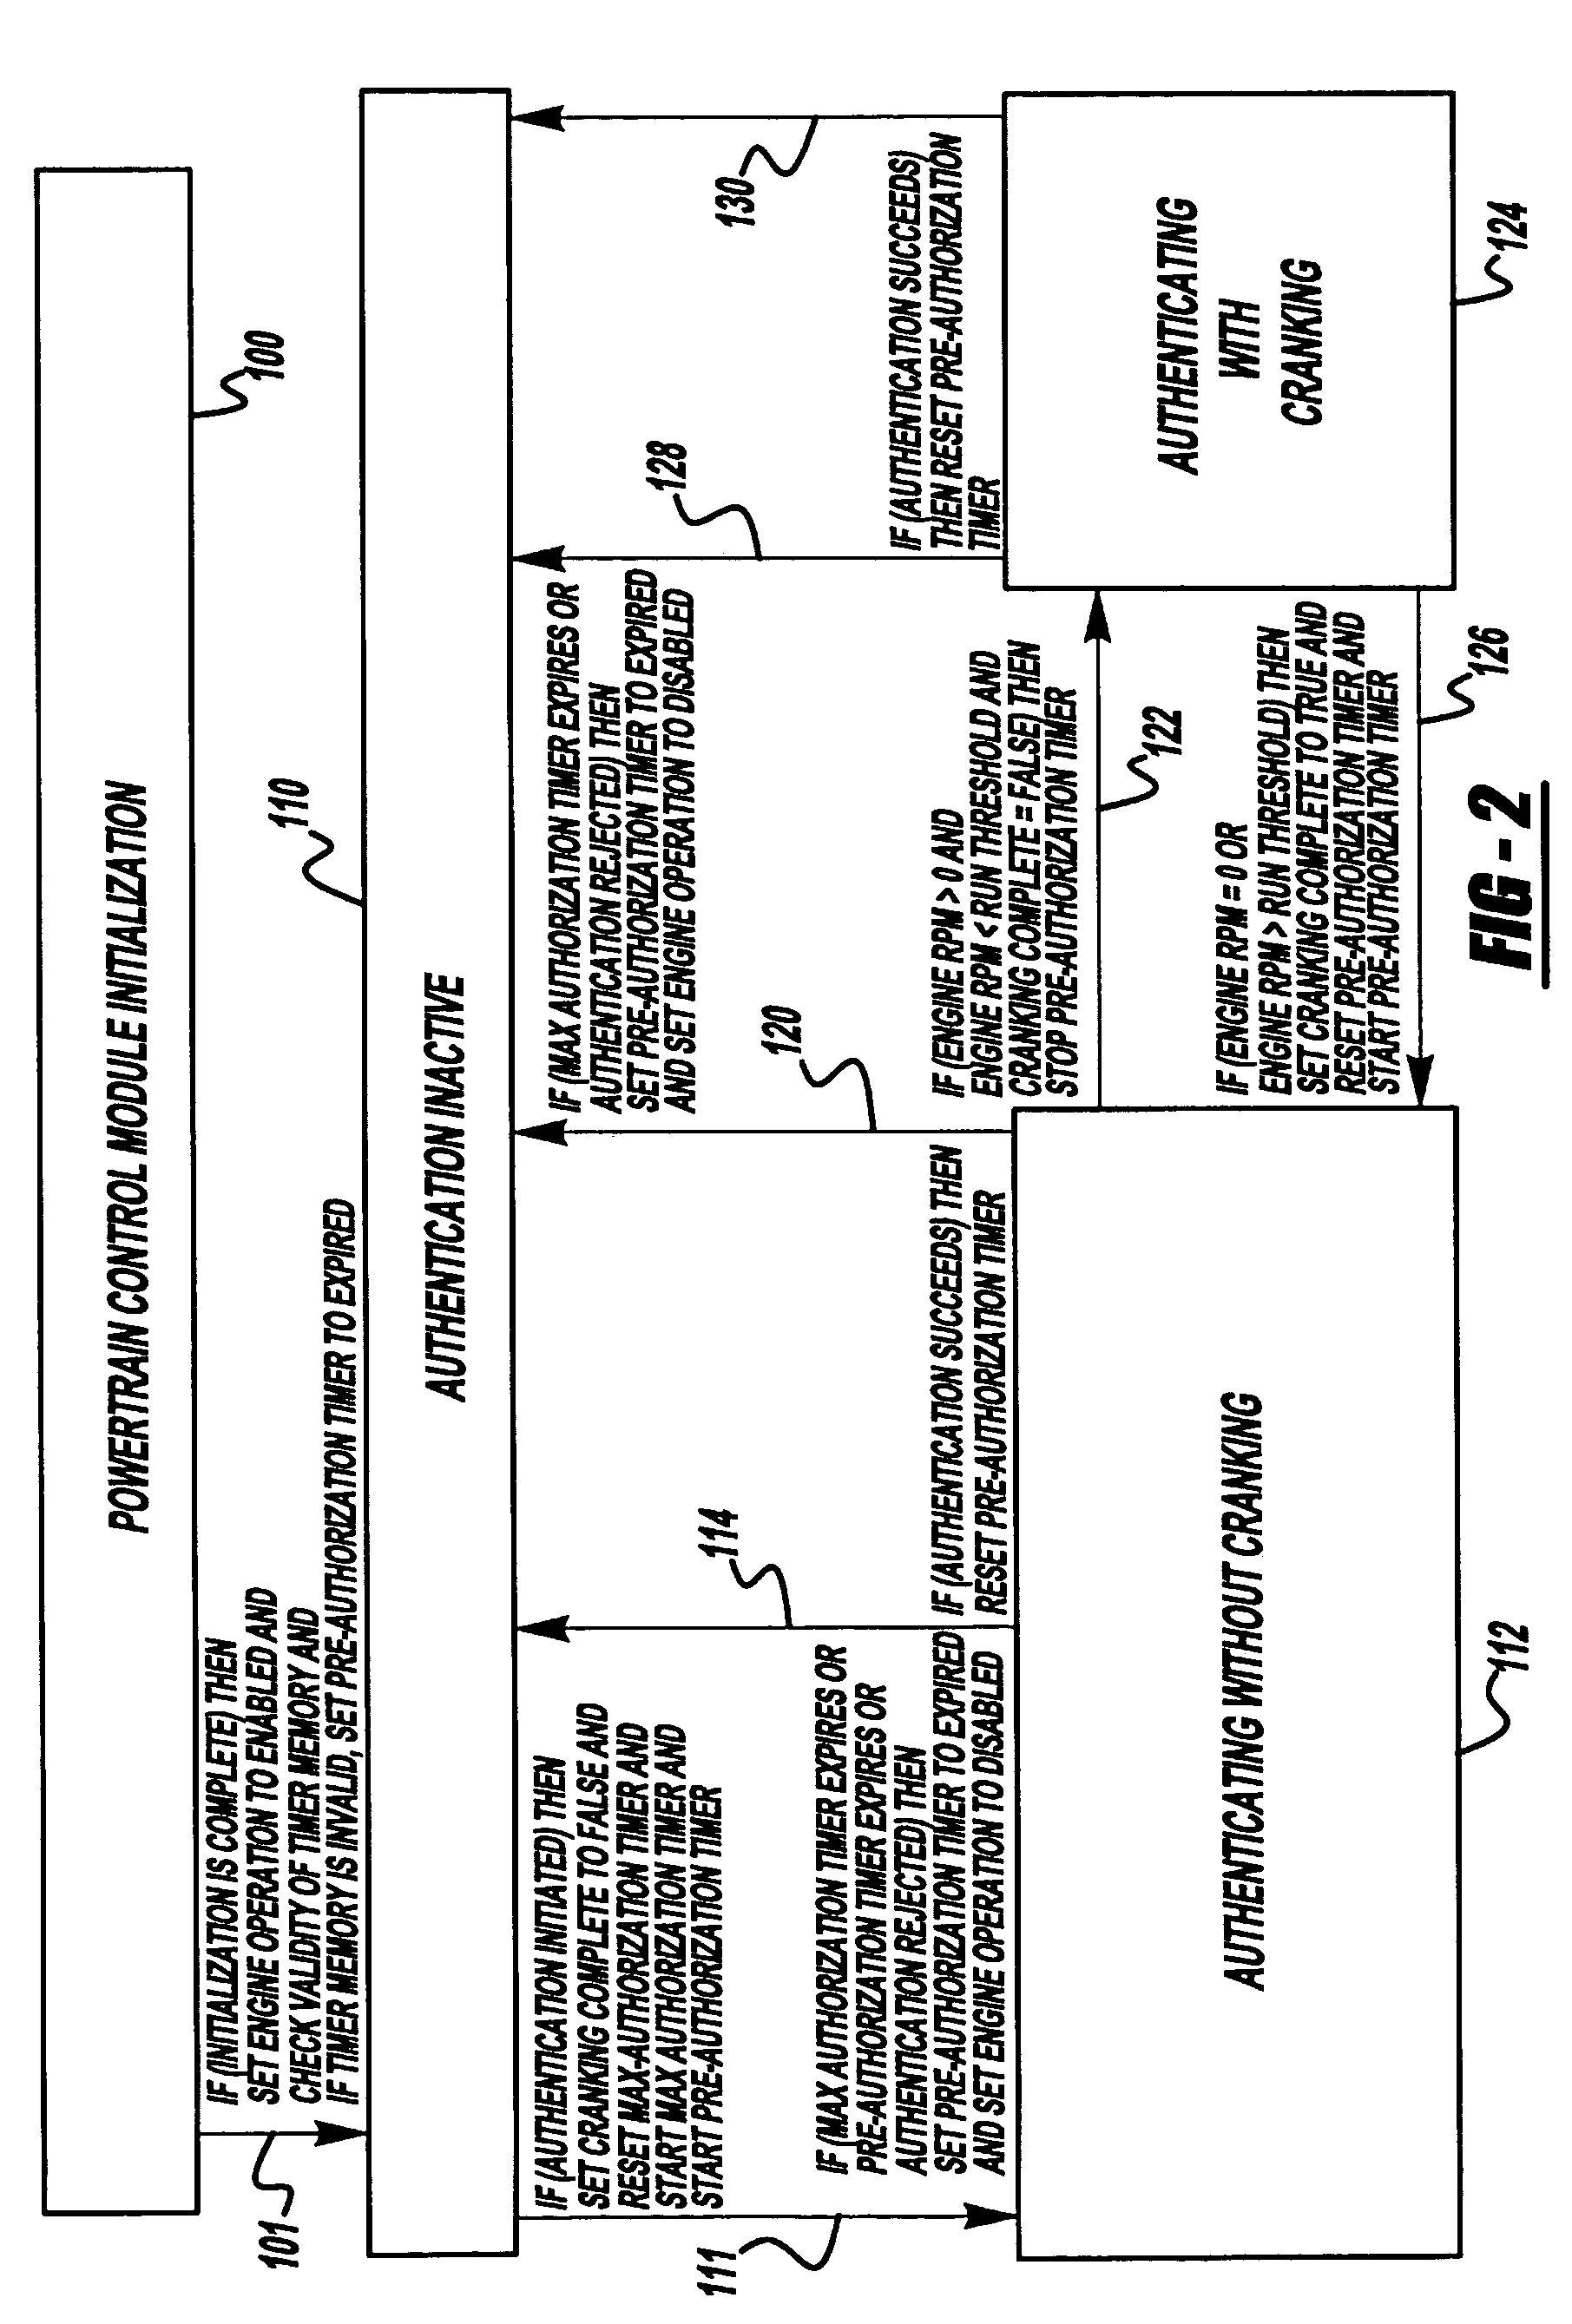 Method for determination of pre-authorization engine operation time for a vehicle theft deterrent system